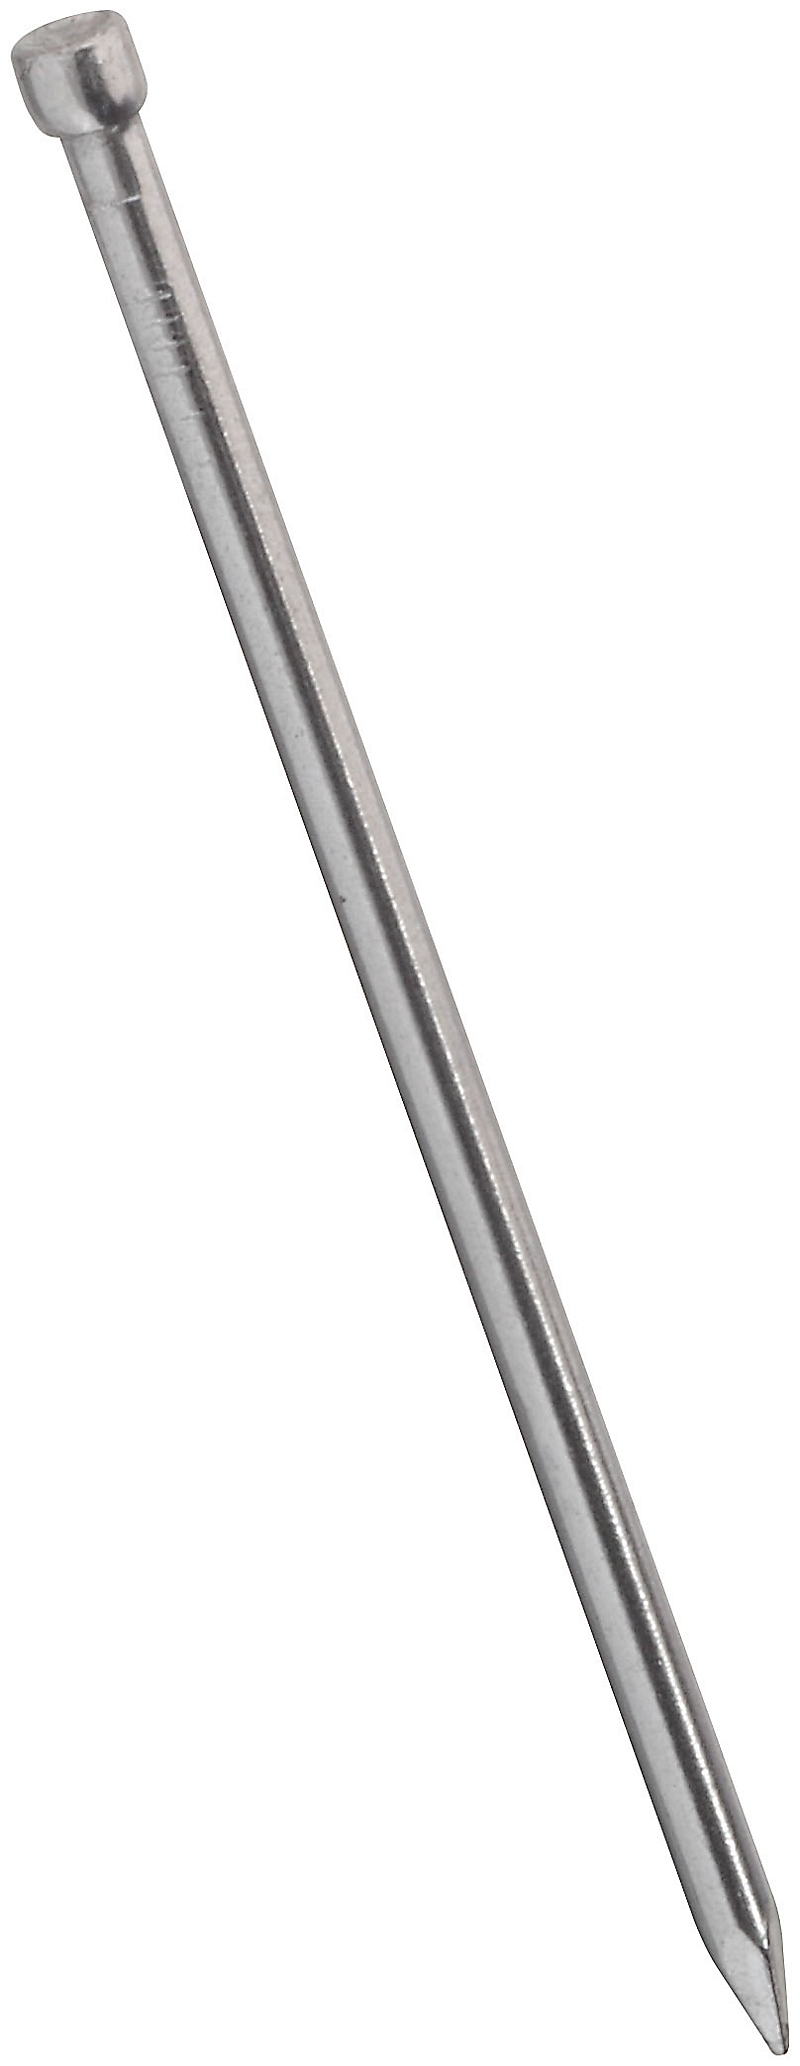 Primary Product Image for Finishing Nail